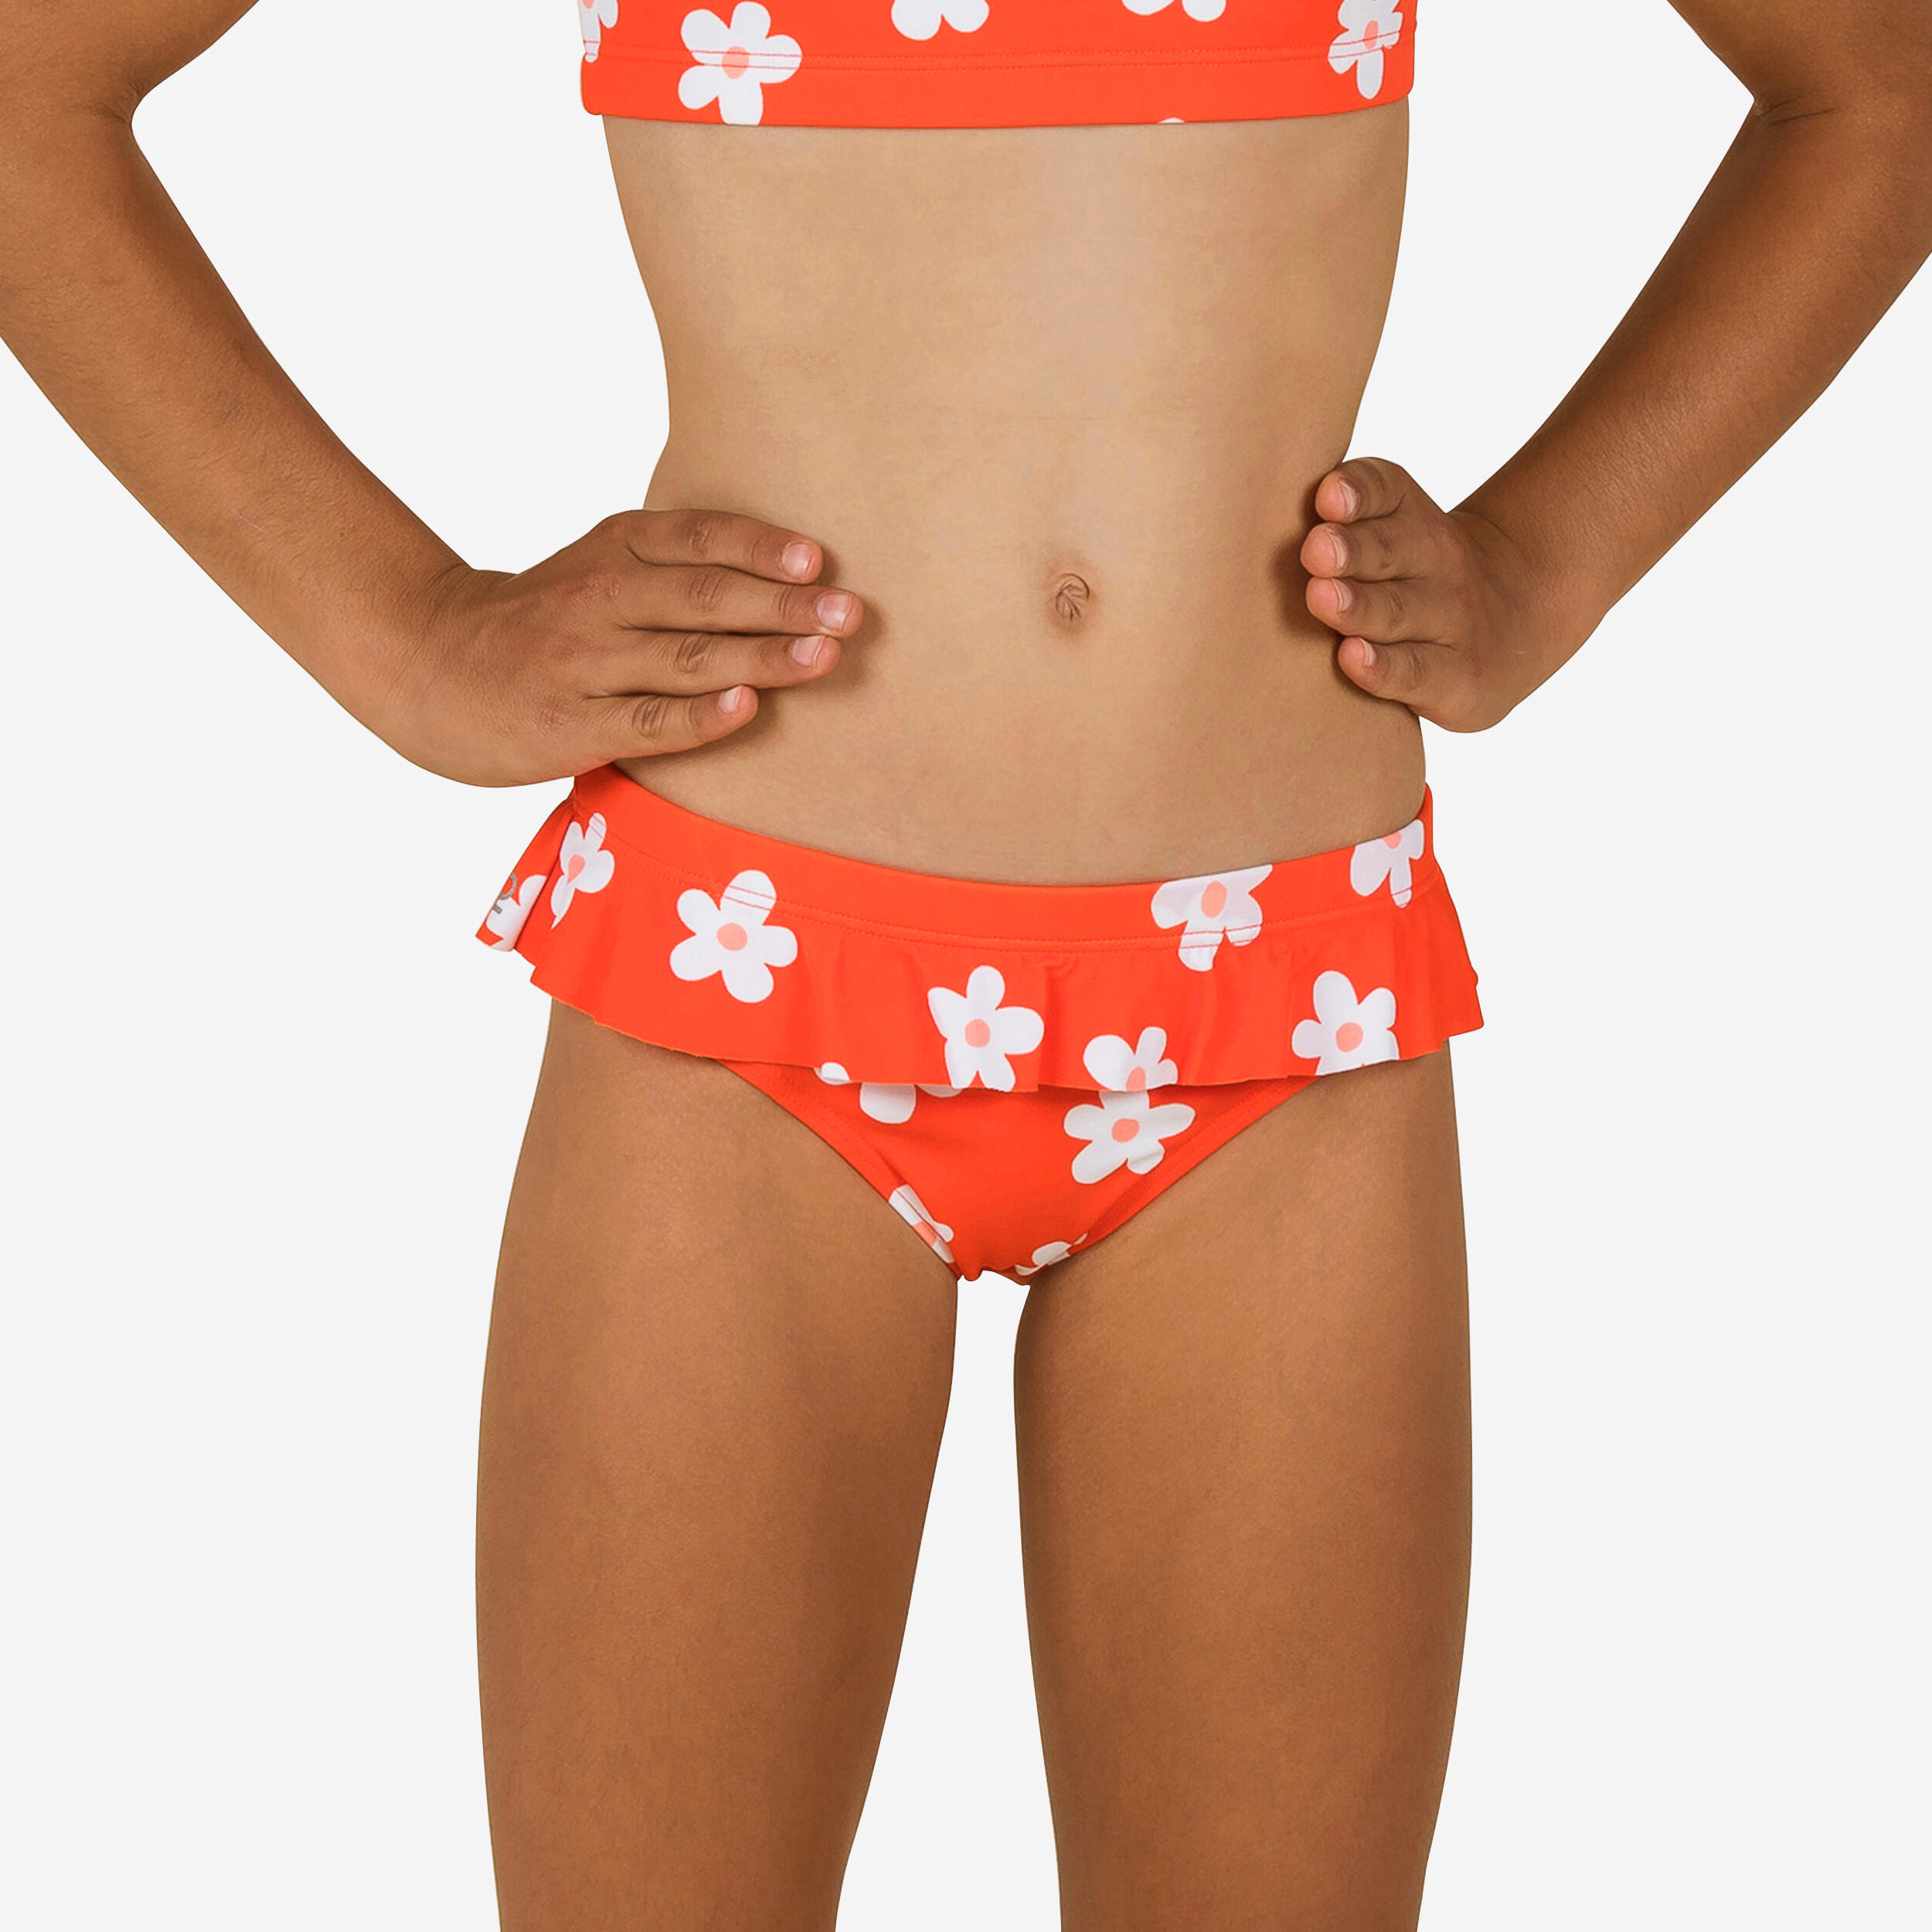 Girls' Swimming Swimsuit Bottoms Lila Marg Red 1/2